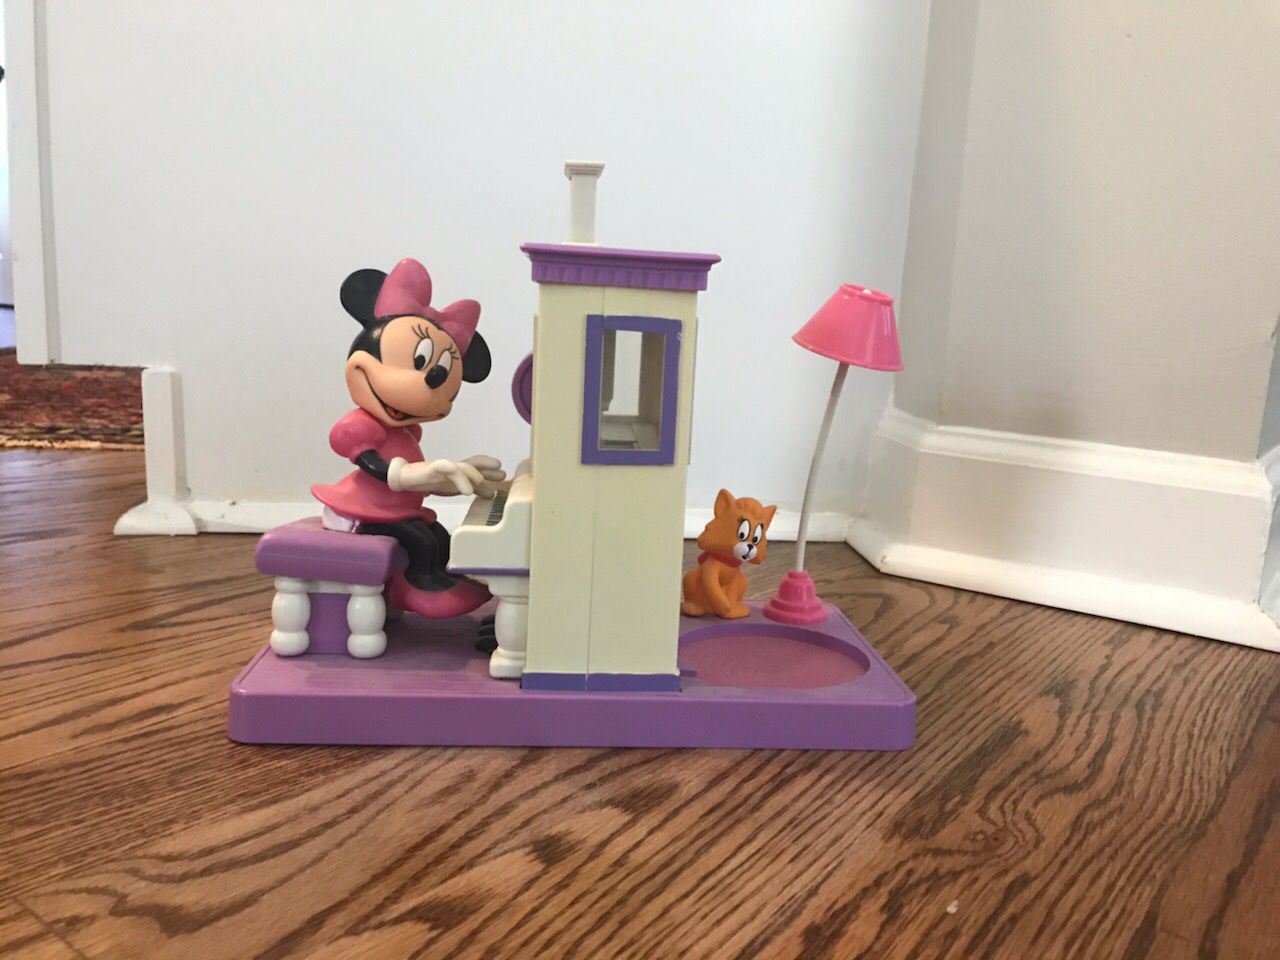 Minnie Mouse candy dispenser